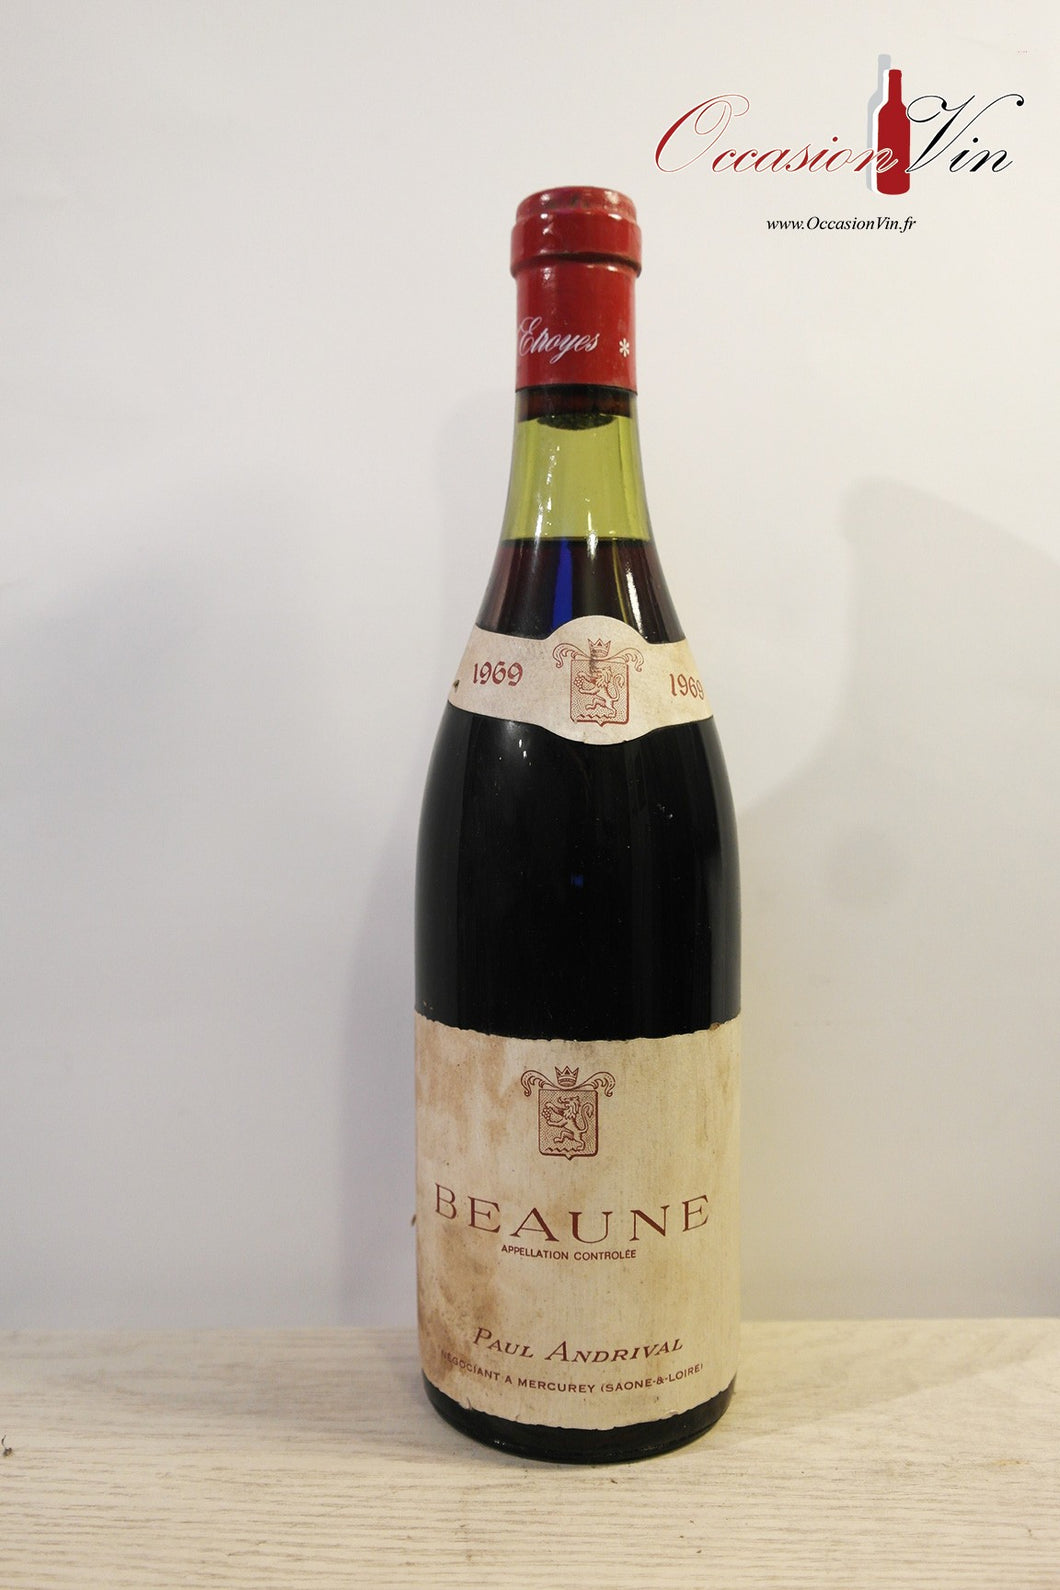 Beaune Andrival Vin 1969